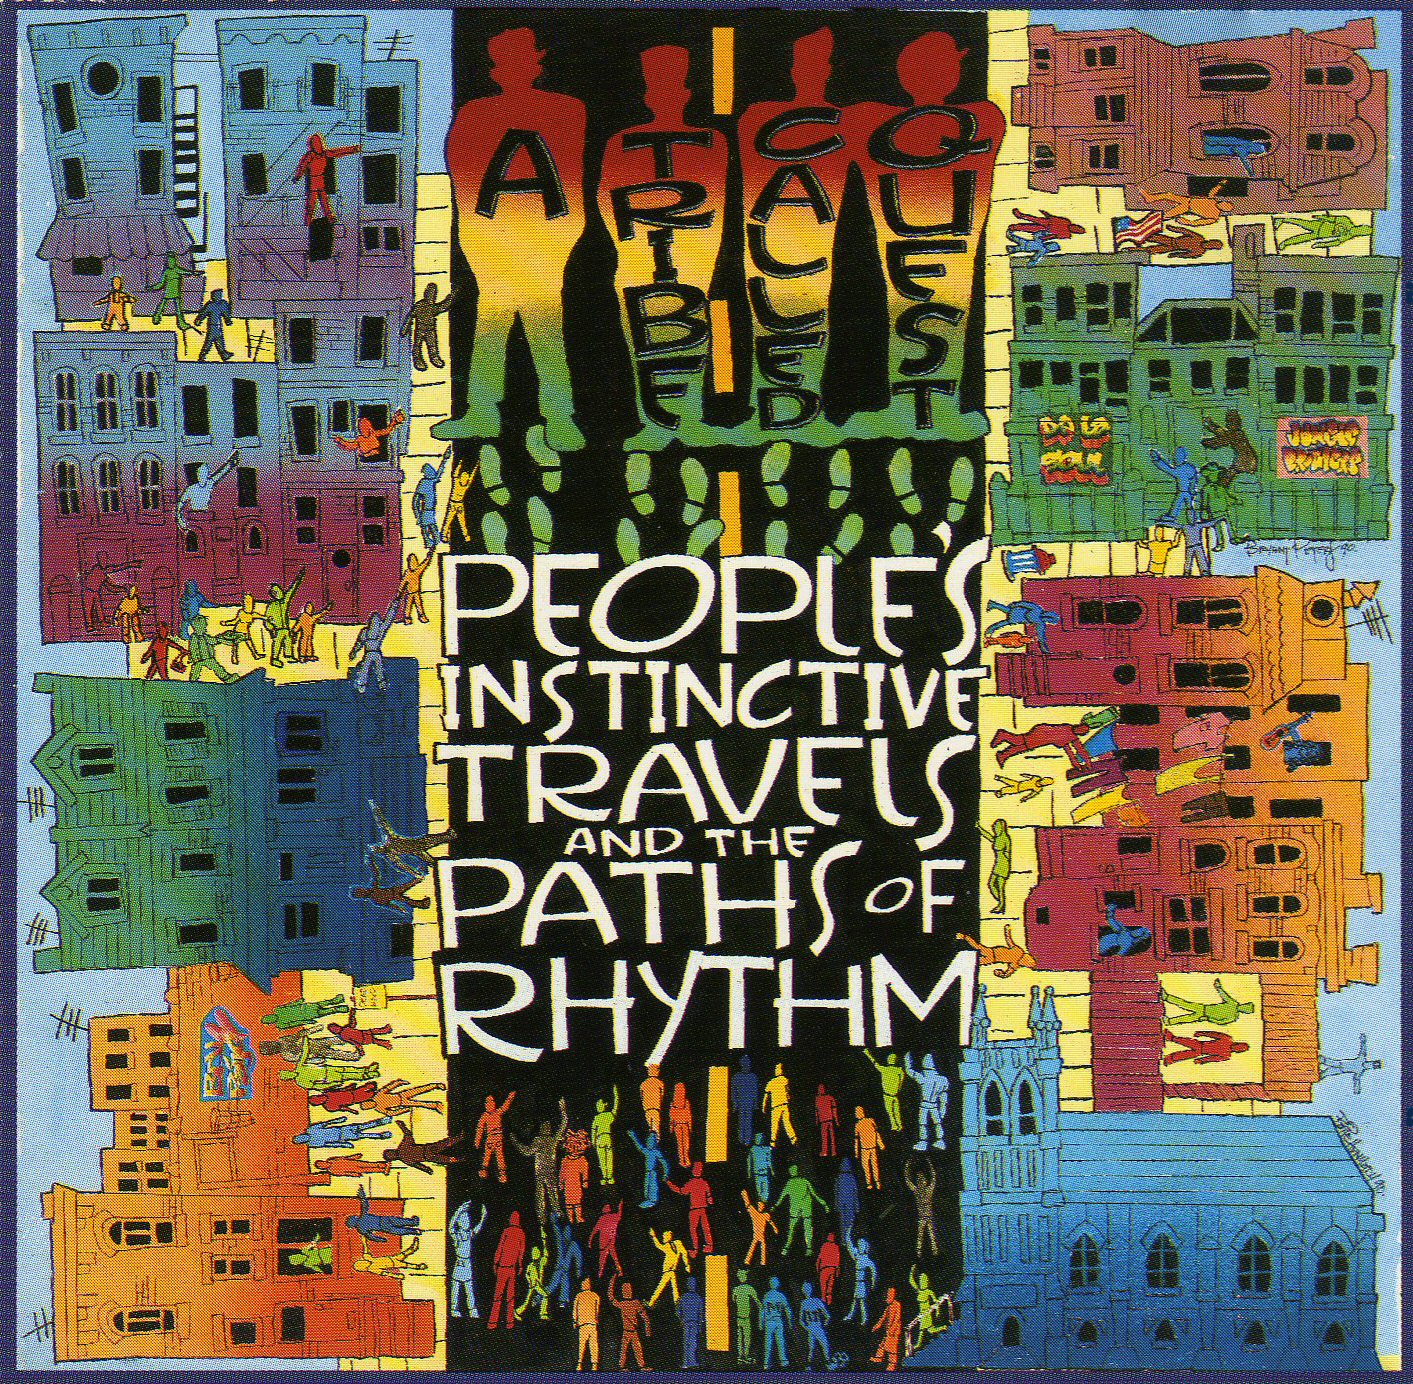 People’s Instinctive Travels and the Paths of Rhythm – A Tribe Called Quest